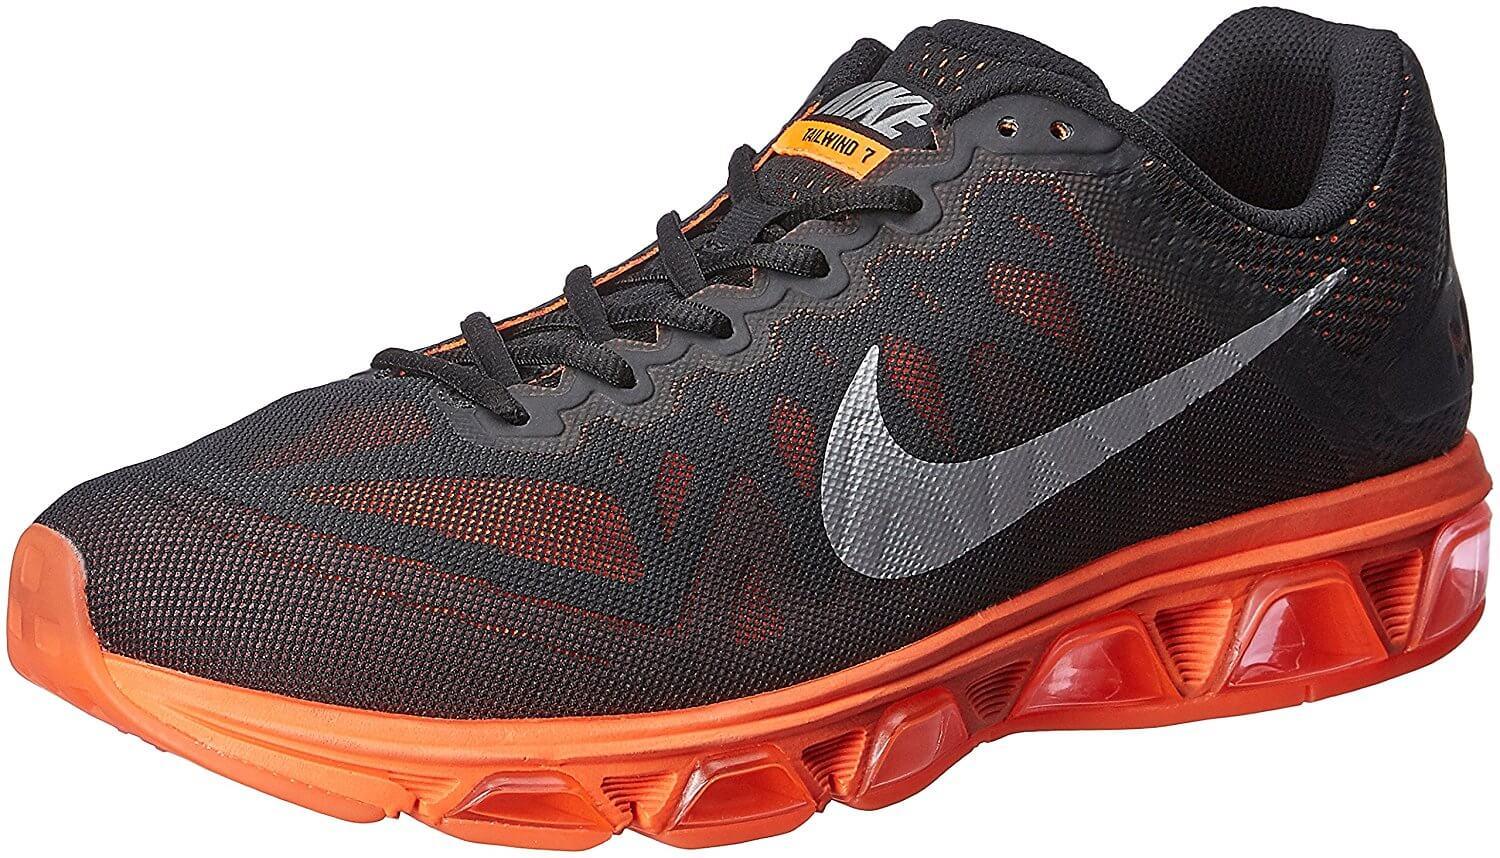 Nike Air Max Tailwind 7 Reviewed Compared | RunnerClick